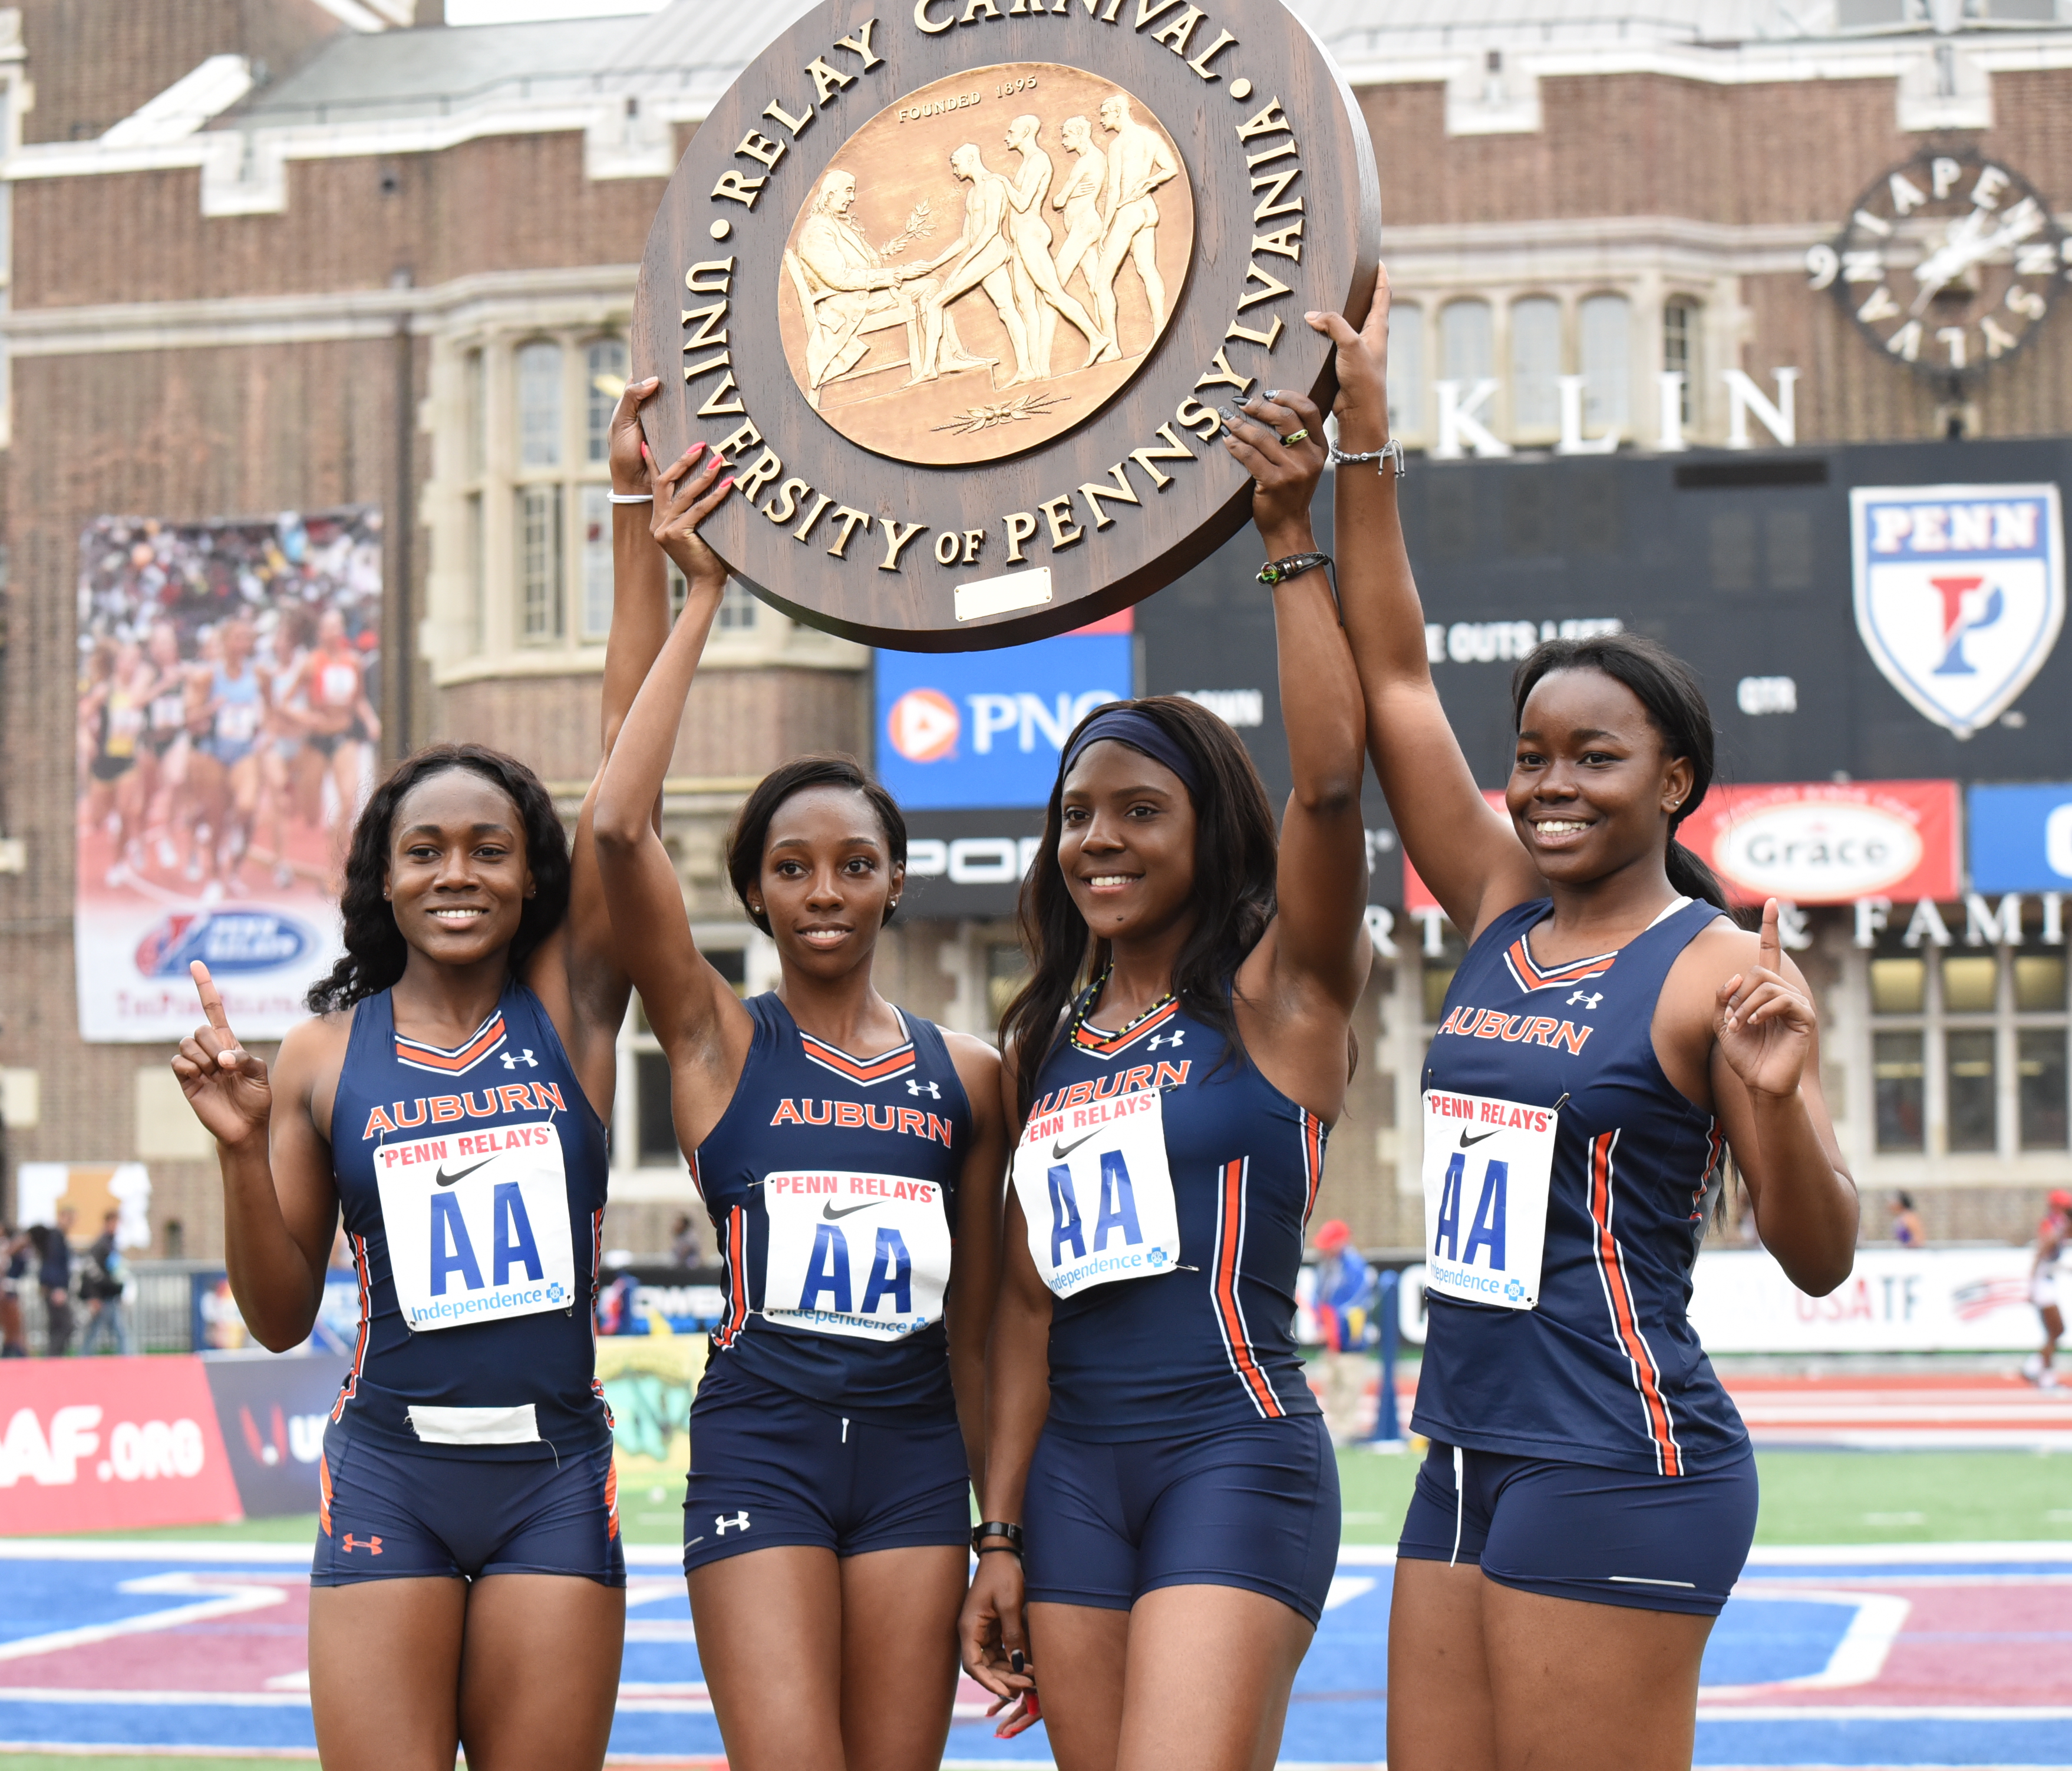 Jamaicans lead Auburn to 4×1 victory at Penn Relays